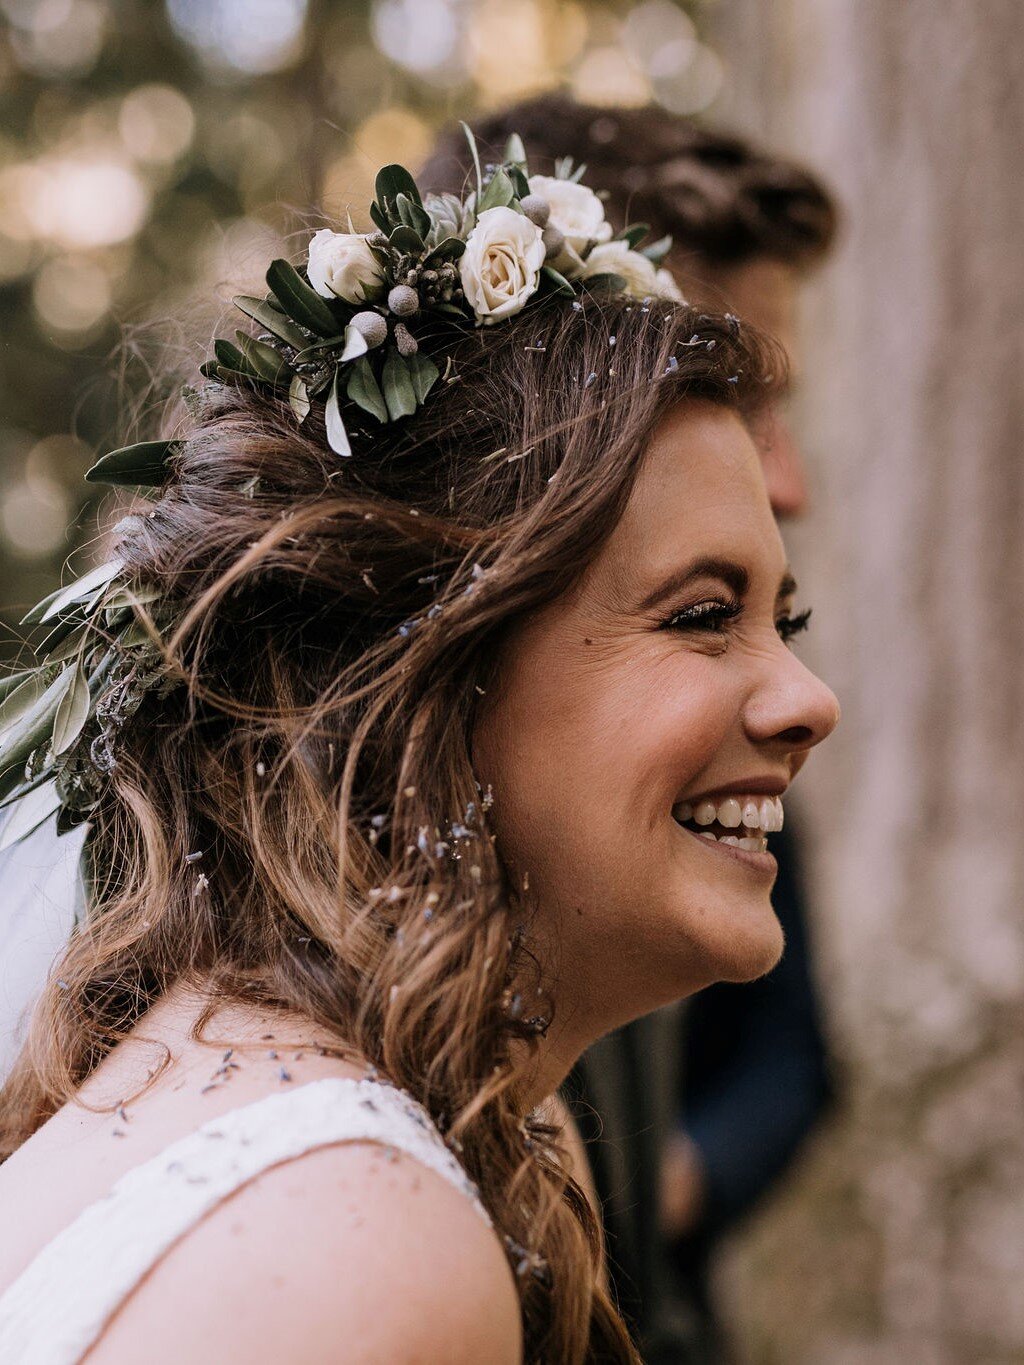 pacific-engagements-lake-crescent-lodge-wedding-hairstyles-flower-crown-bride-hair-styles